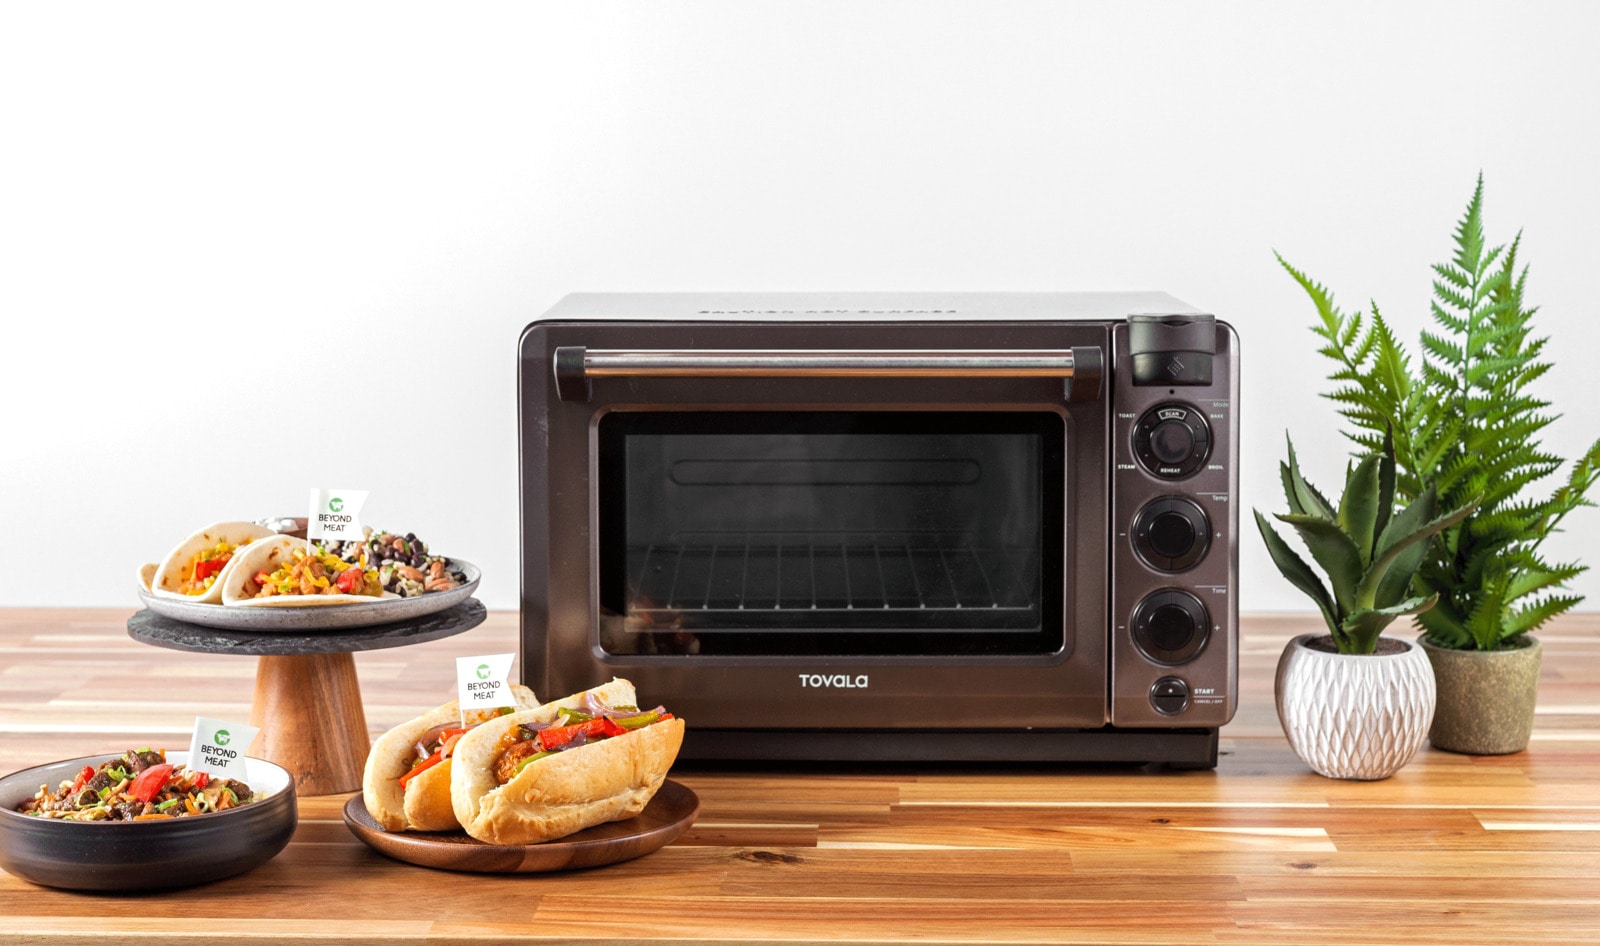 New Smart Oven Will Cook Beyond Meat Vegan Meals to Perfection at Home